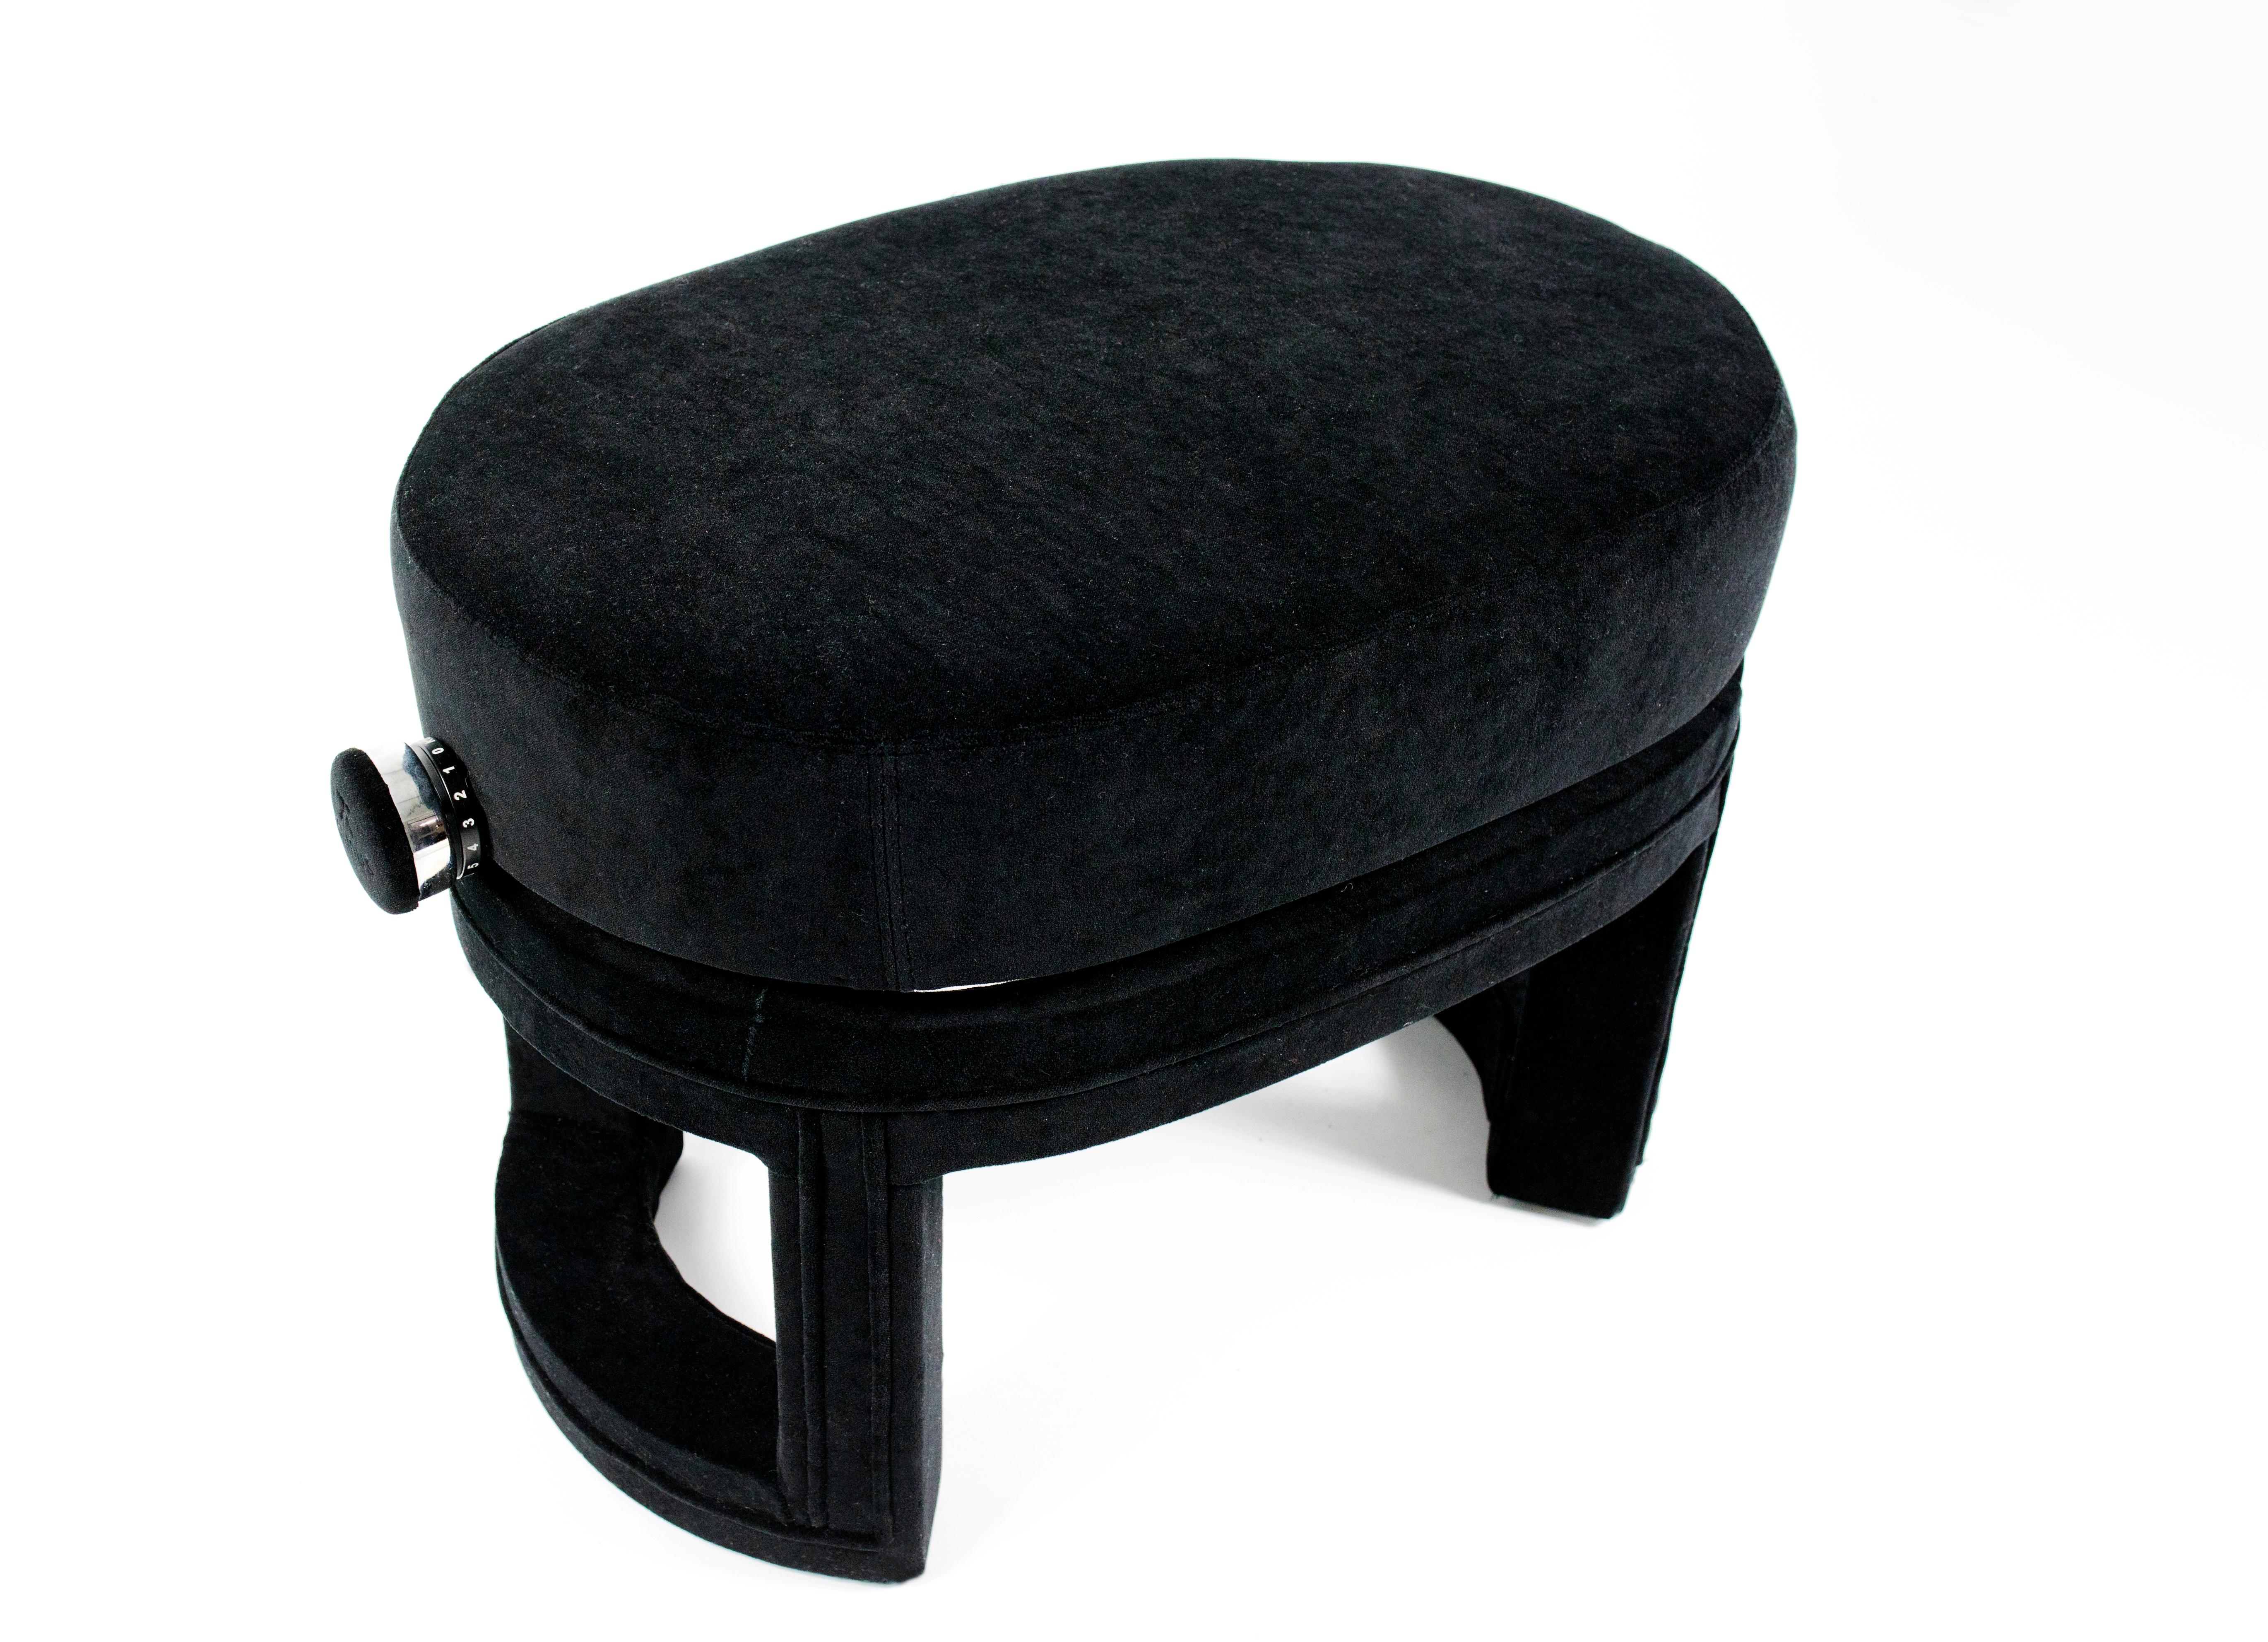 Spanish Velvet Upholstered Stool, Bespoked Piano Bench with Adjustable Height For Sale